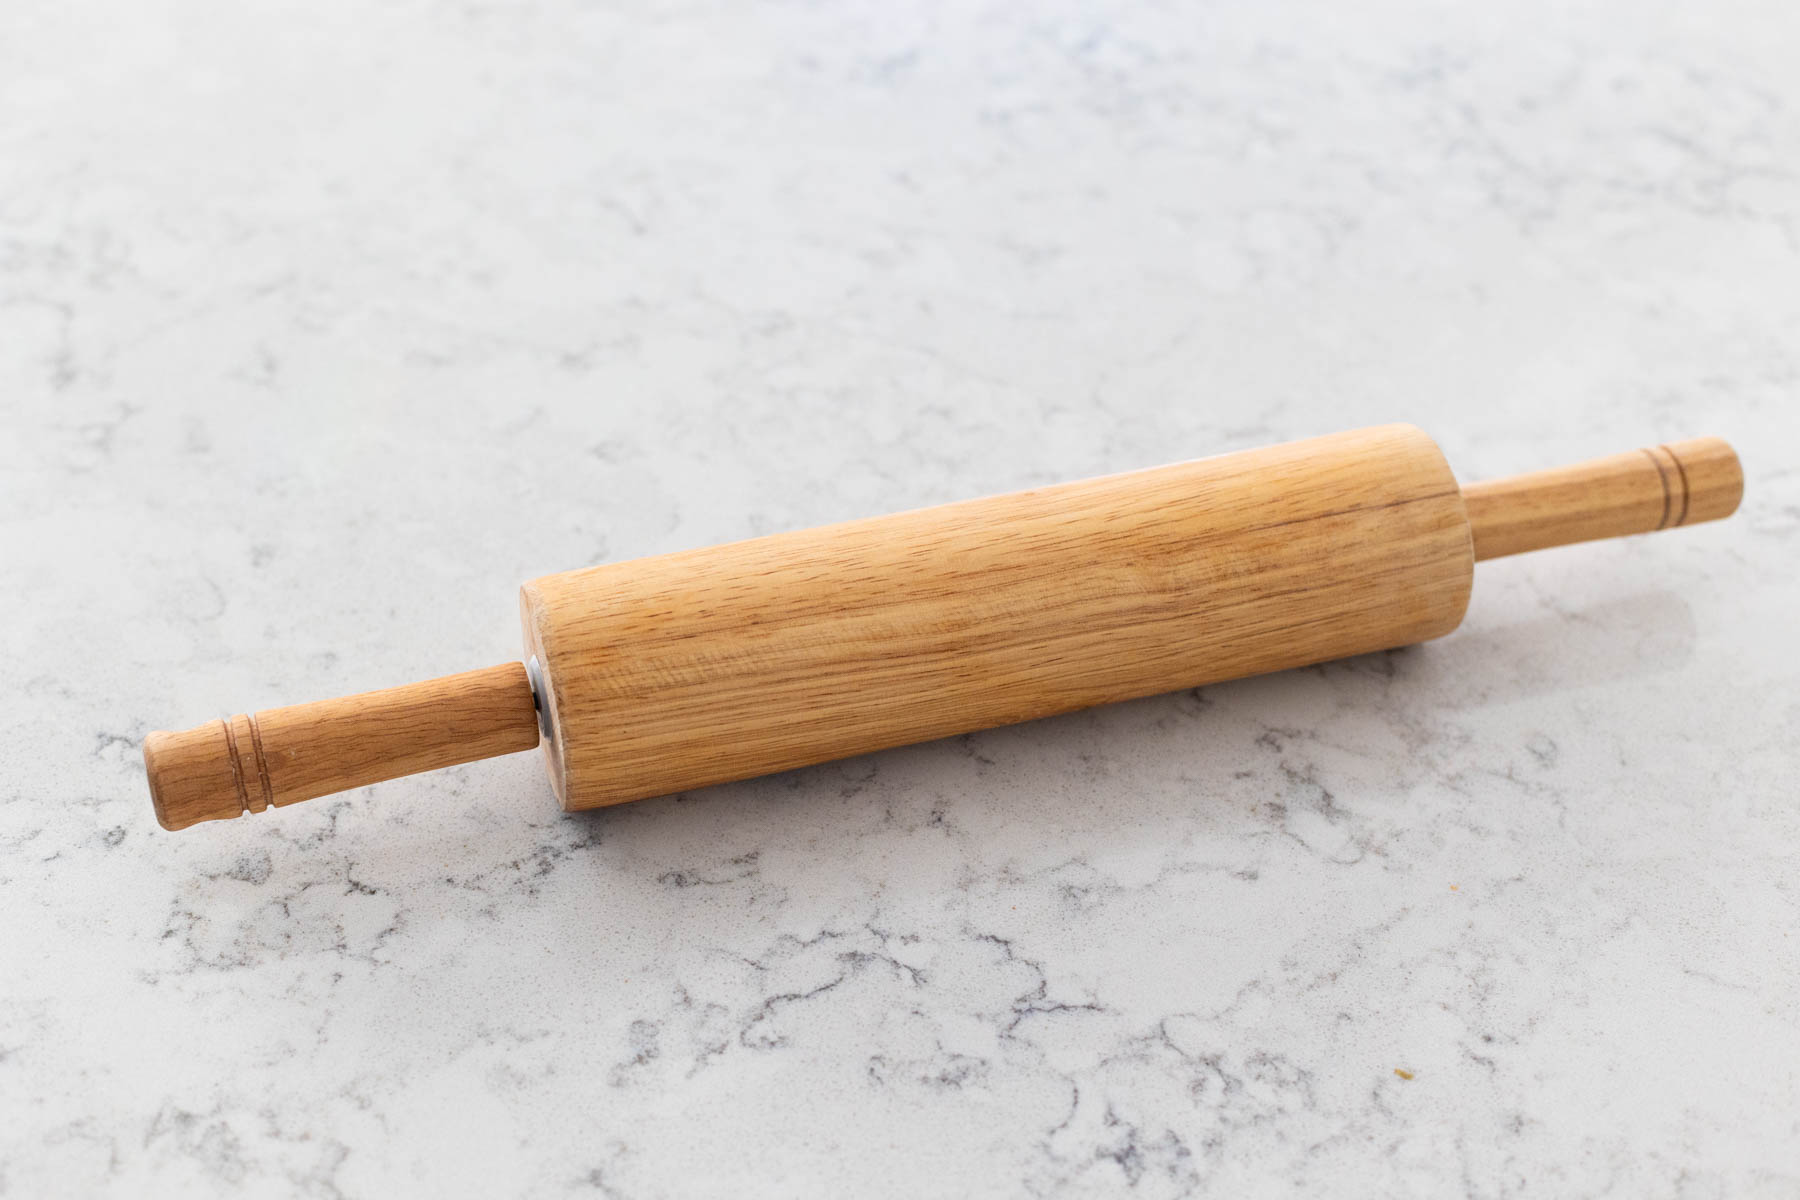 A wooden rolling pin is on the counter.